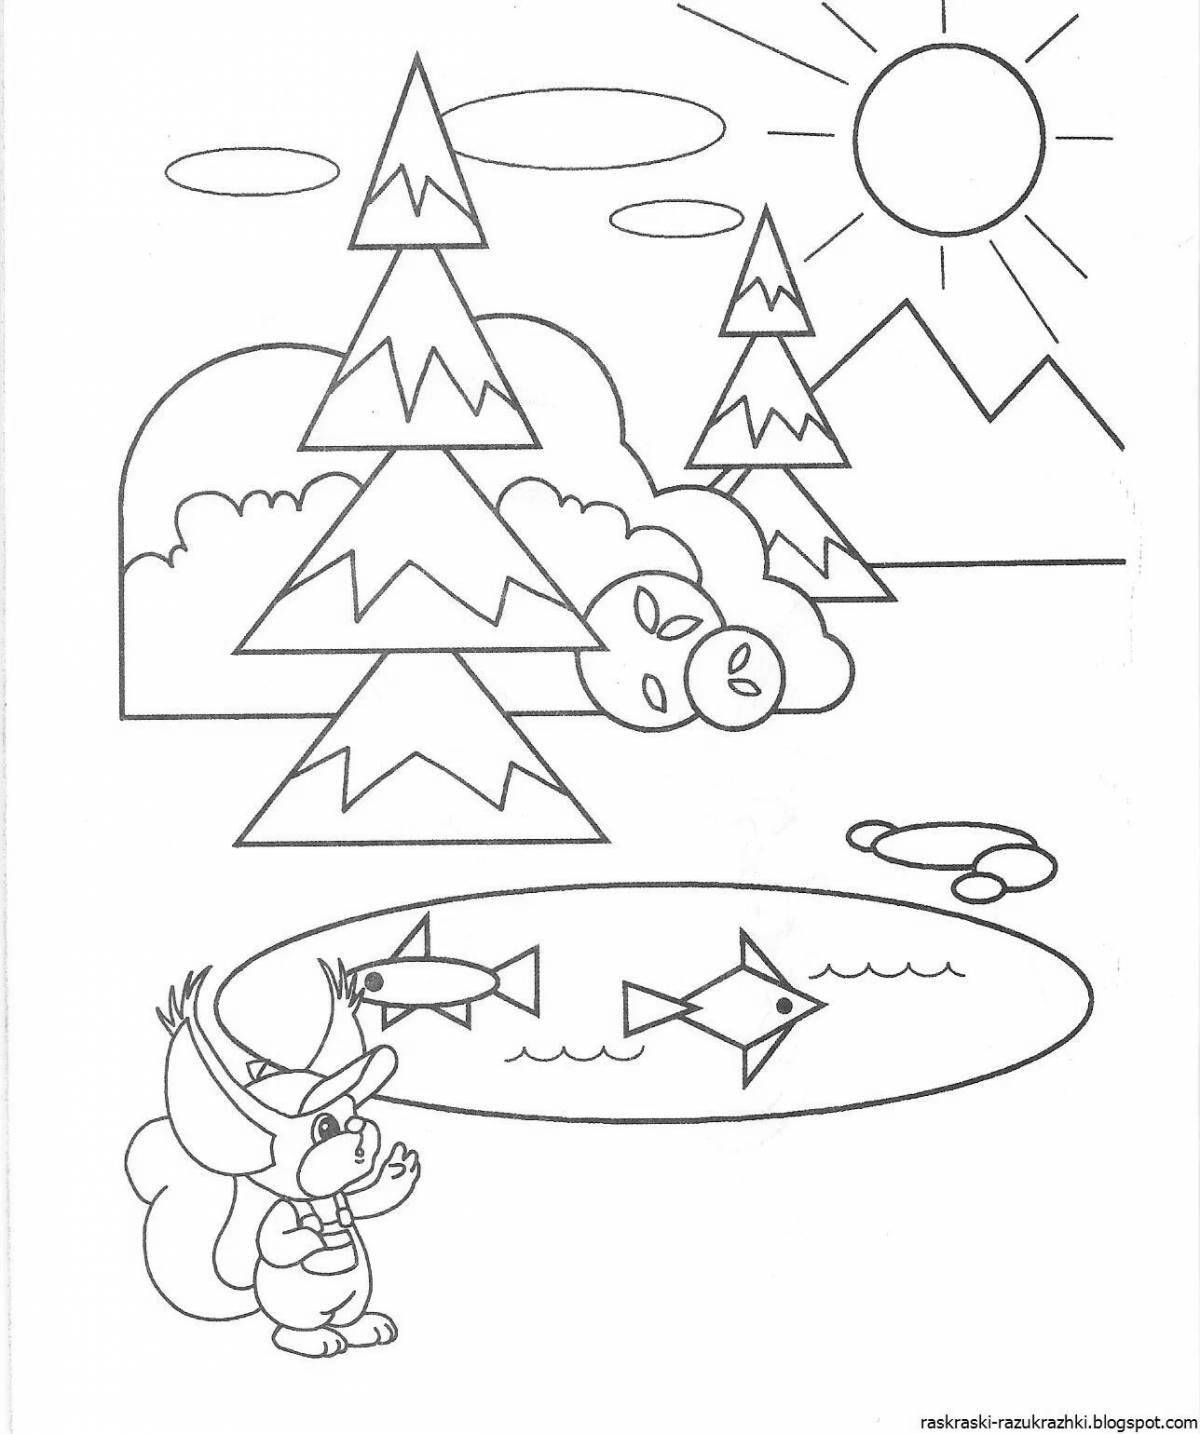 Colored fun geometric shapes coloring for preschoolers